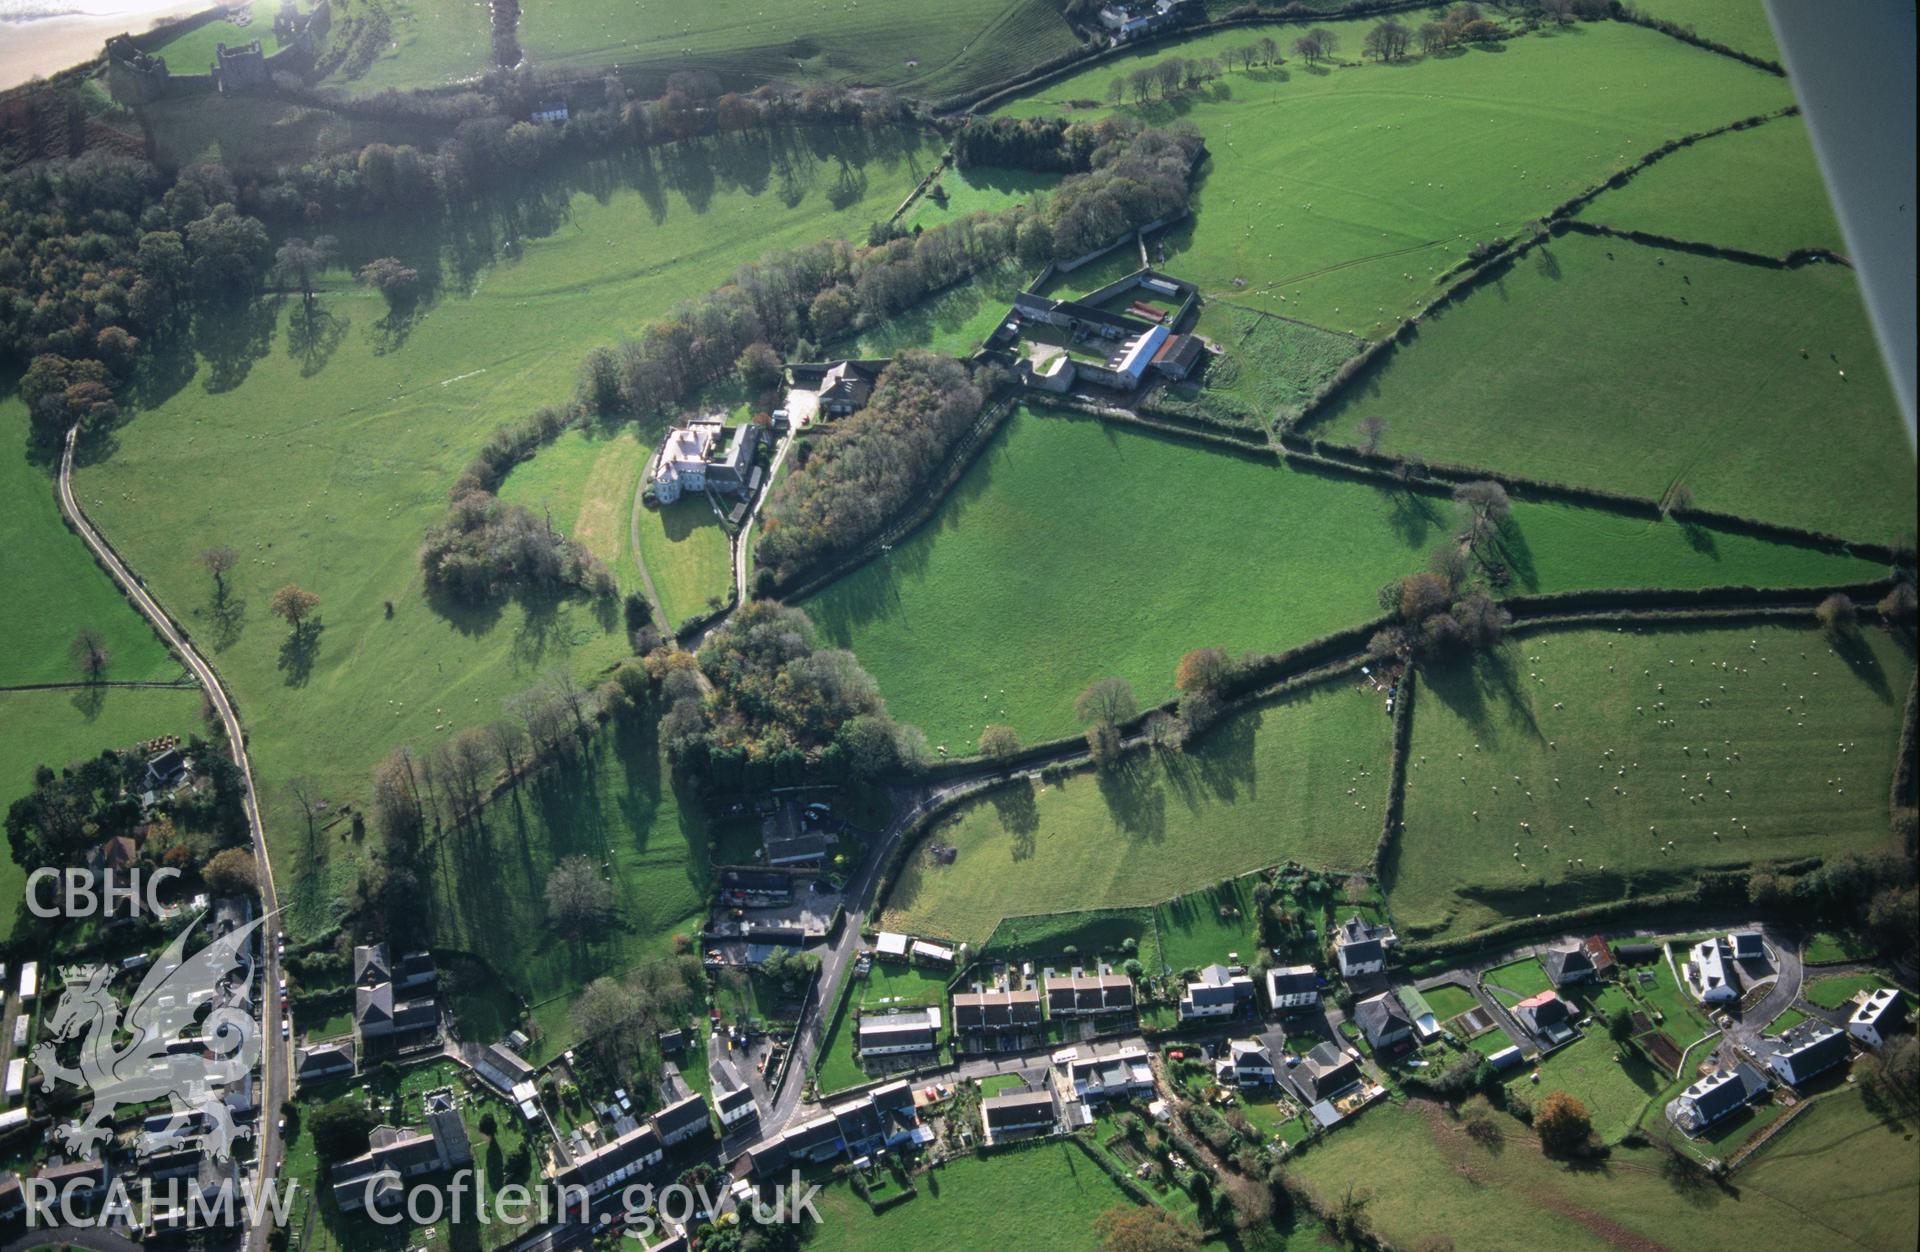 Slide of RCAHMW colour oblique aerial photograph of Llanstephan, taken by T.G. Driver, 30/10/1998.